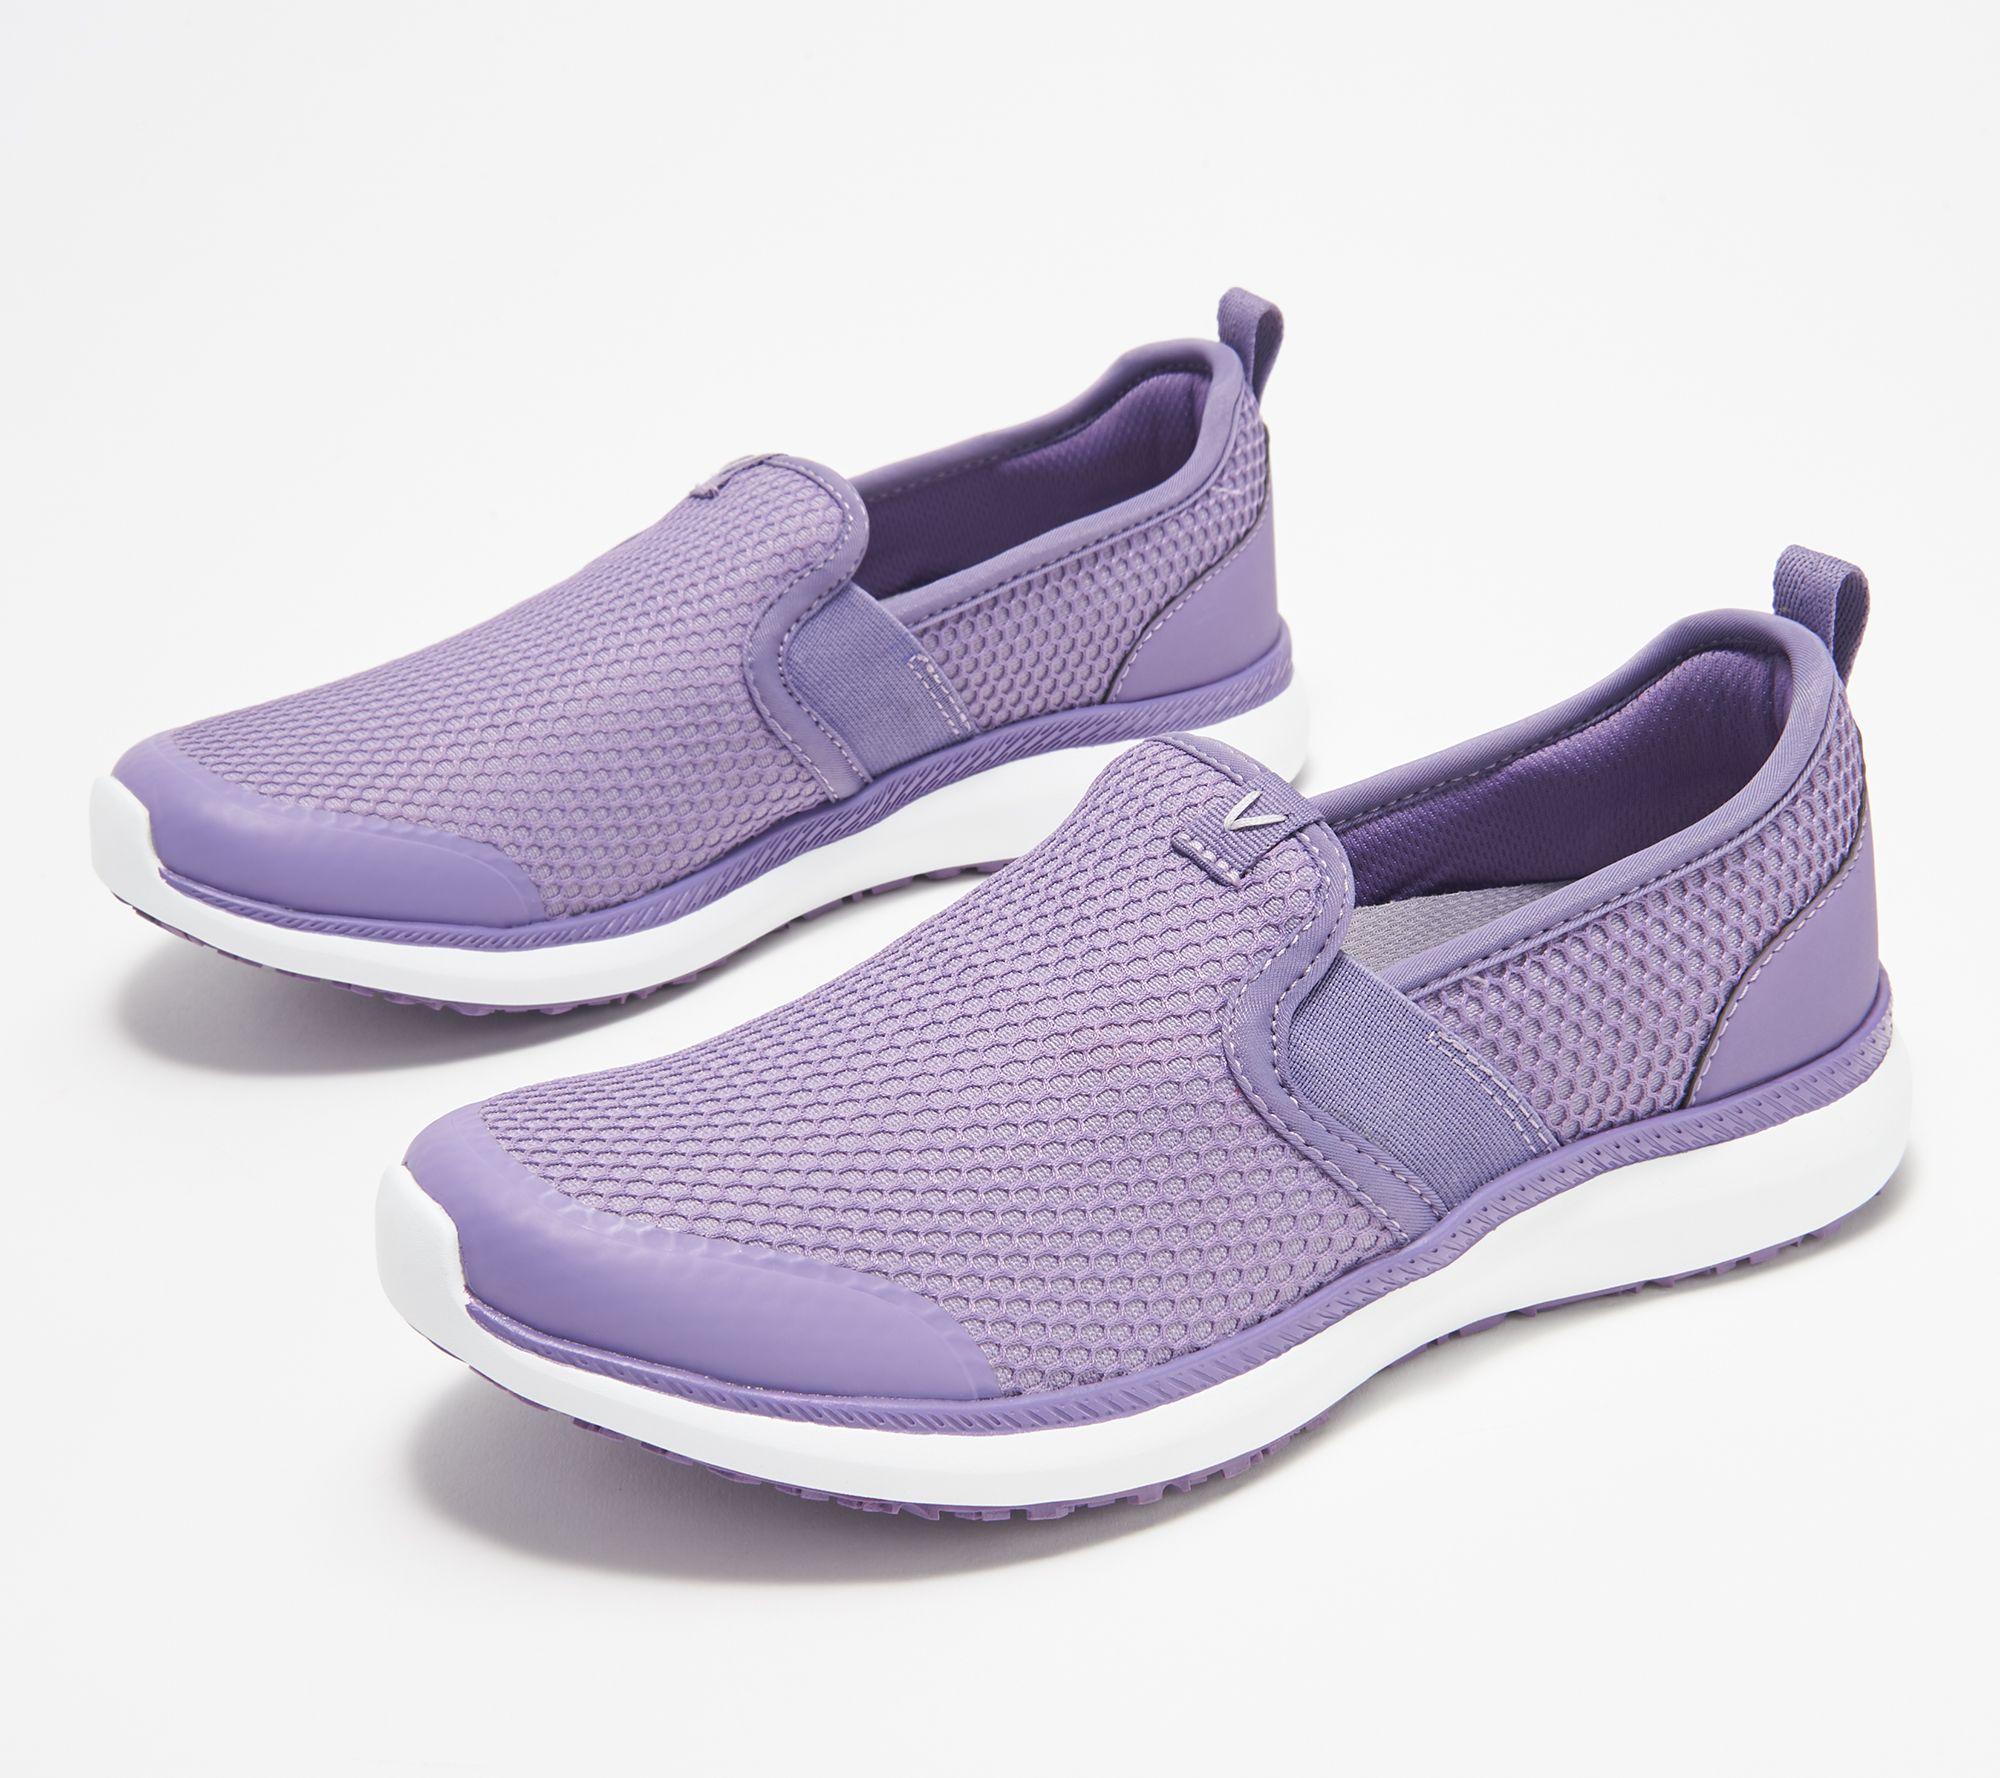 Vionic Womens Julianna Workout Exercise Slip-On Sneakers, 42% OFF